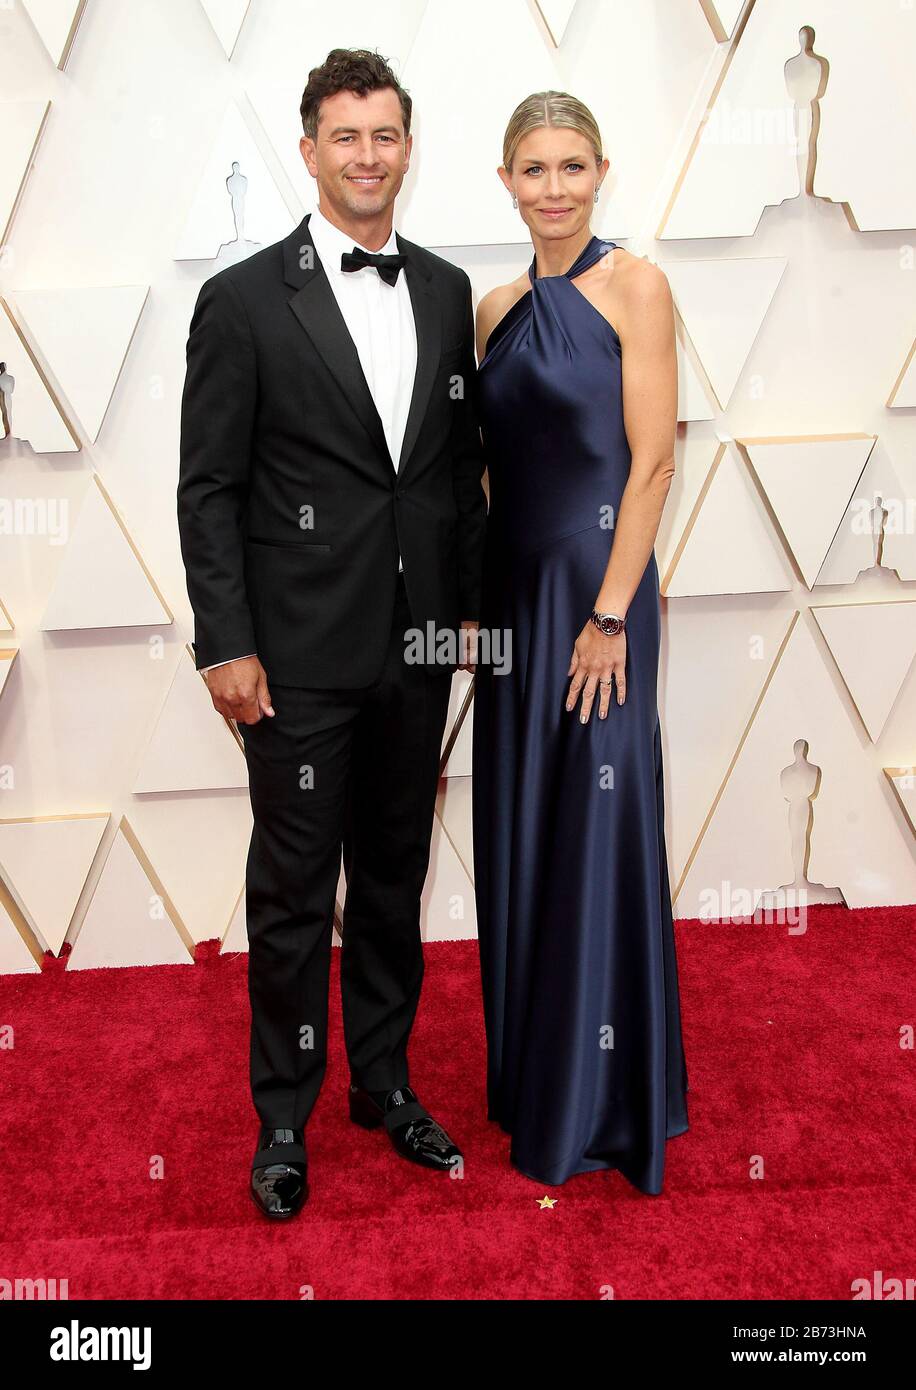 92nd Academy Awards (Oscars 2020) - Arrivals held at the Dolby Theatre in Los Angeles, California. Featuring: Guest Where: Los Angeles, California, United States When: 09 Feb 2020 Credit: Adriana M. Barraza/WENN Stock Photo